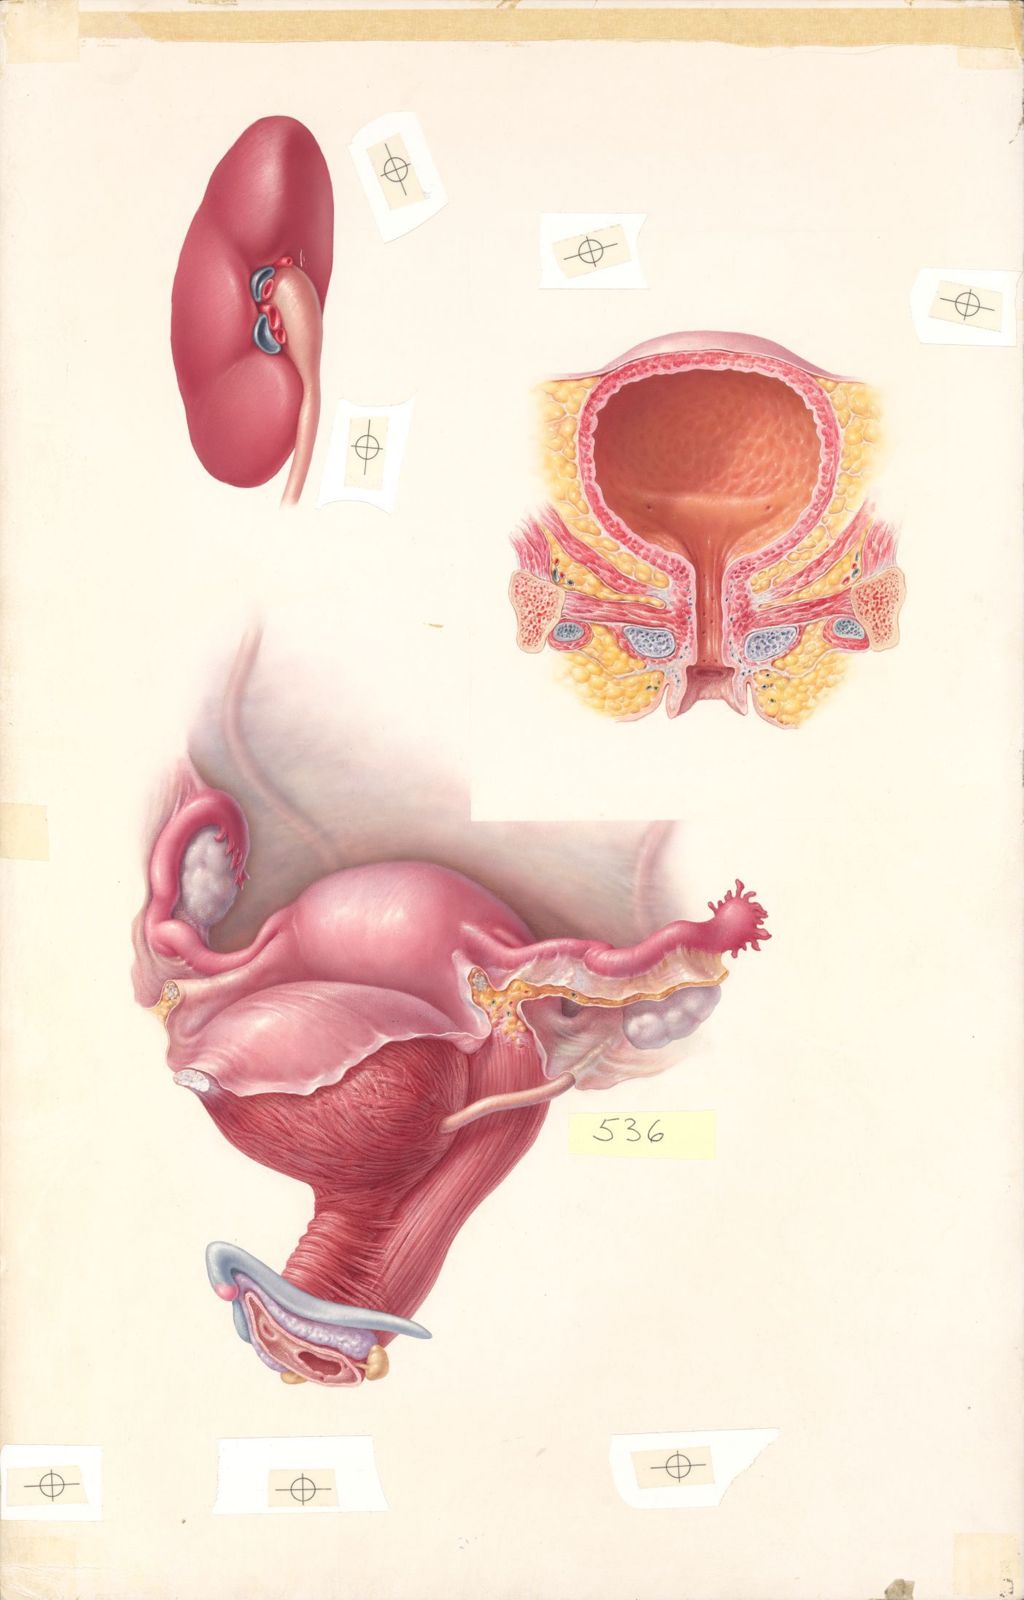 Doctor-Patient Explanatory Atlas of Anatomy, the female urogenital tract, Plate I, the urinary system and pelvic viscera as seen from the left